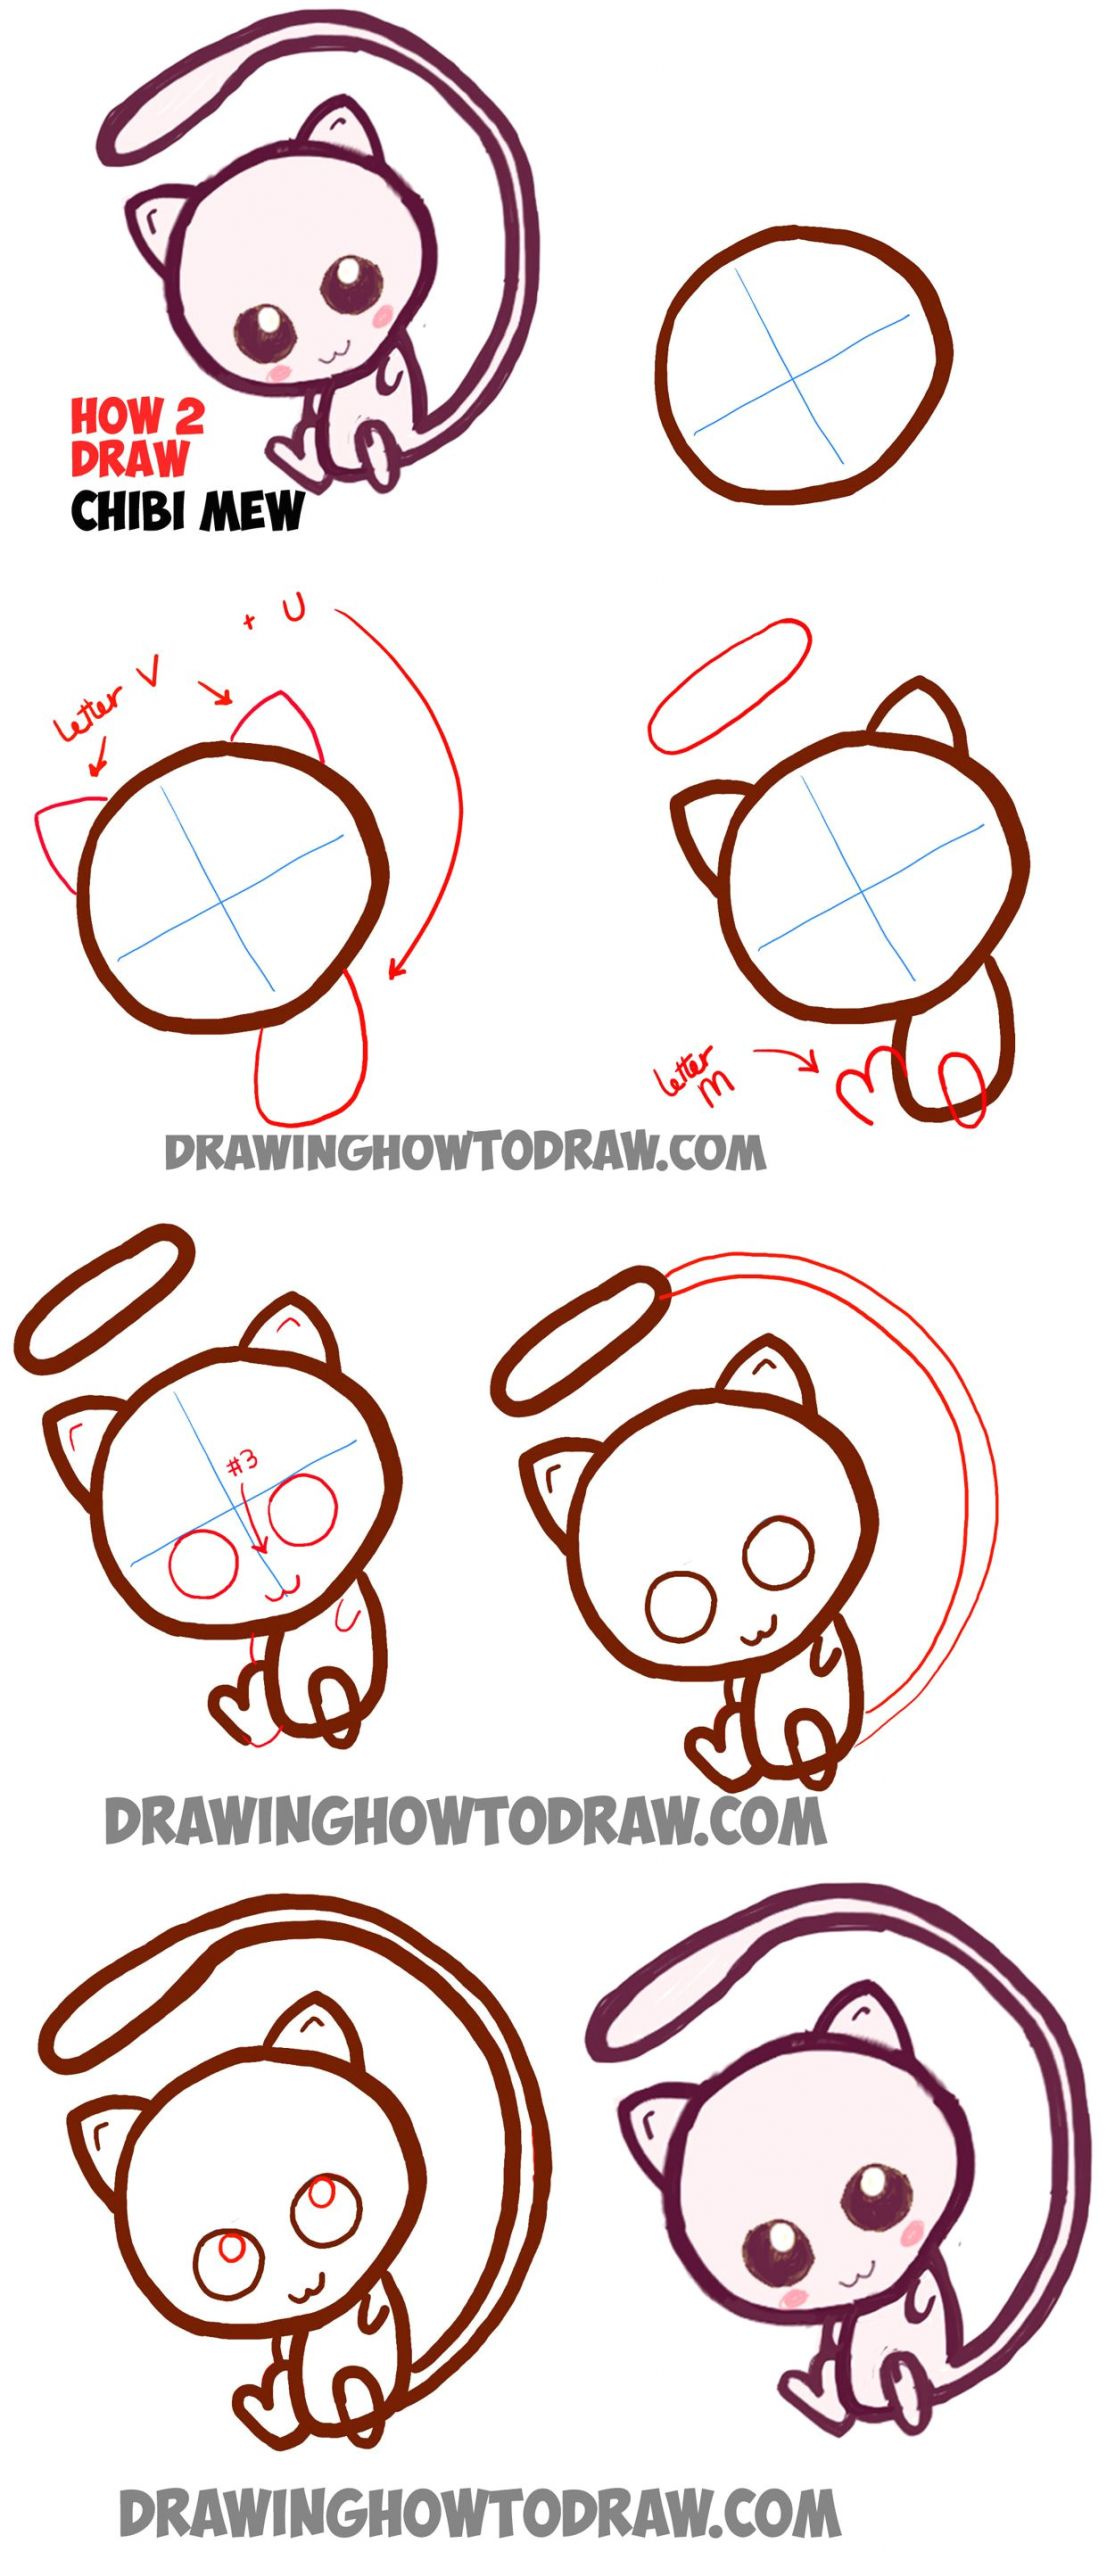 Easy Basic Drawing How to Draw Cute Baby Chibi Mew From Pokemon Easy Step by